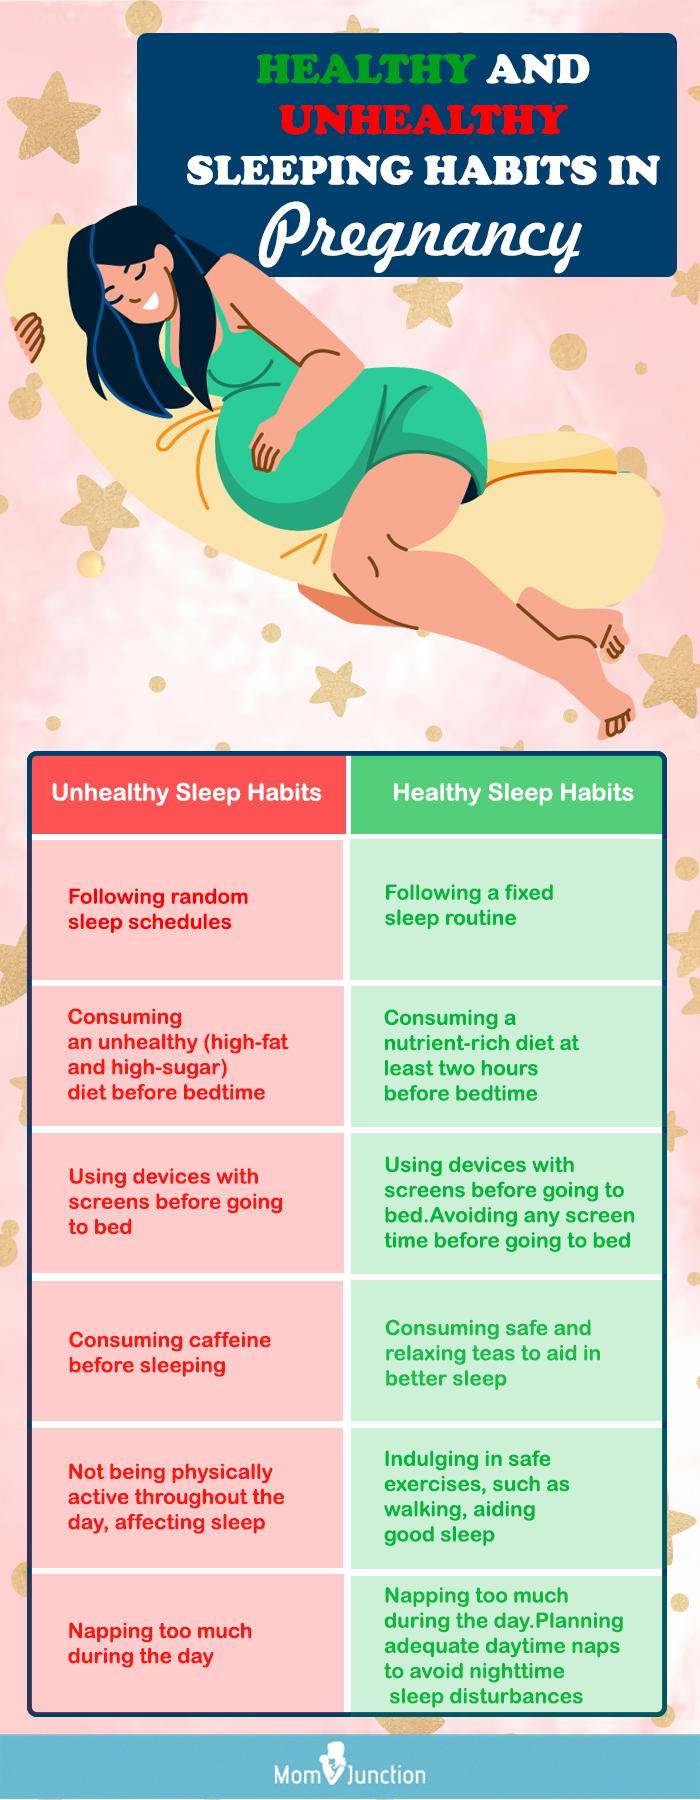 healthy and unhealthy sleeping habits in pregnancy [infographic]